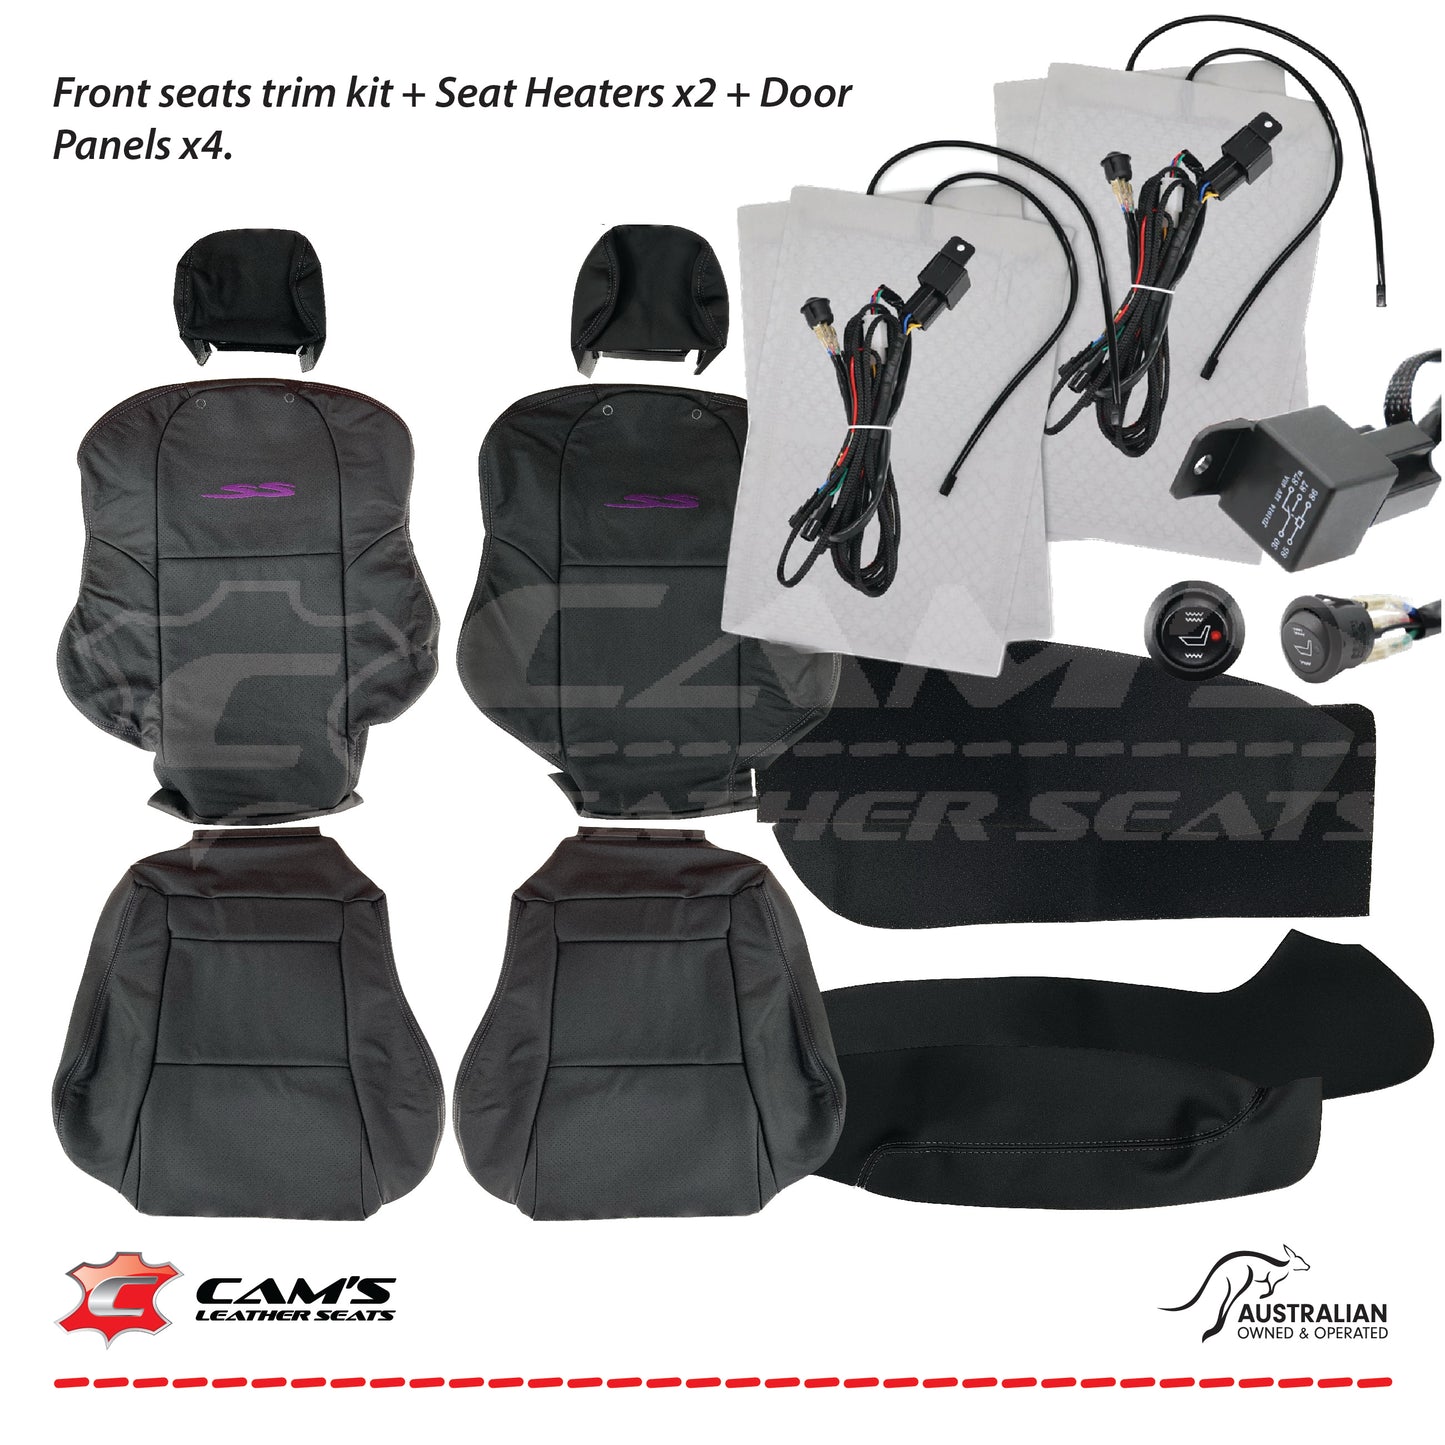 LEATHER SEATS TRIM KIT FOR HOLDEN VT/VX SS UTE BLACK WITH PURPLE STITCHING